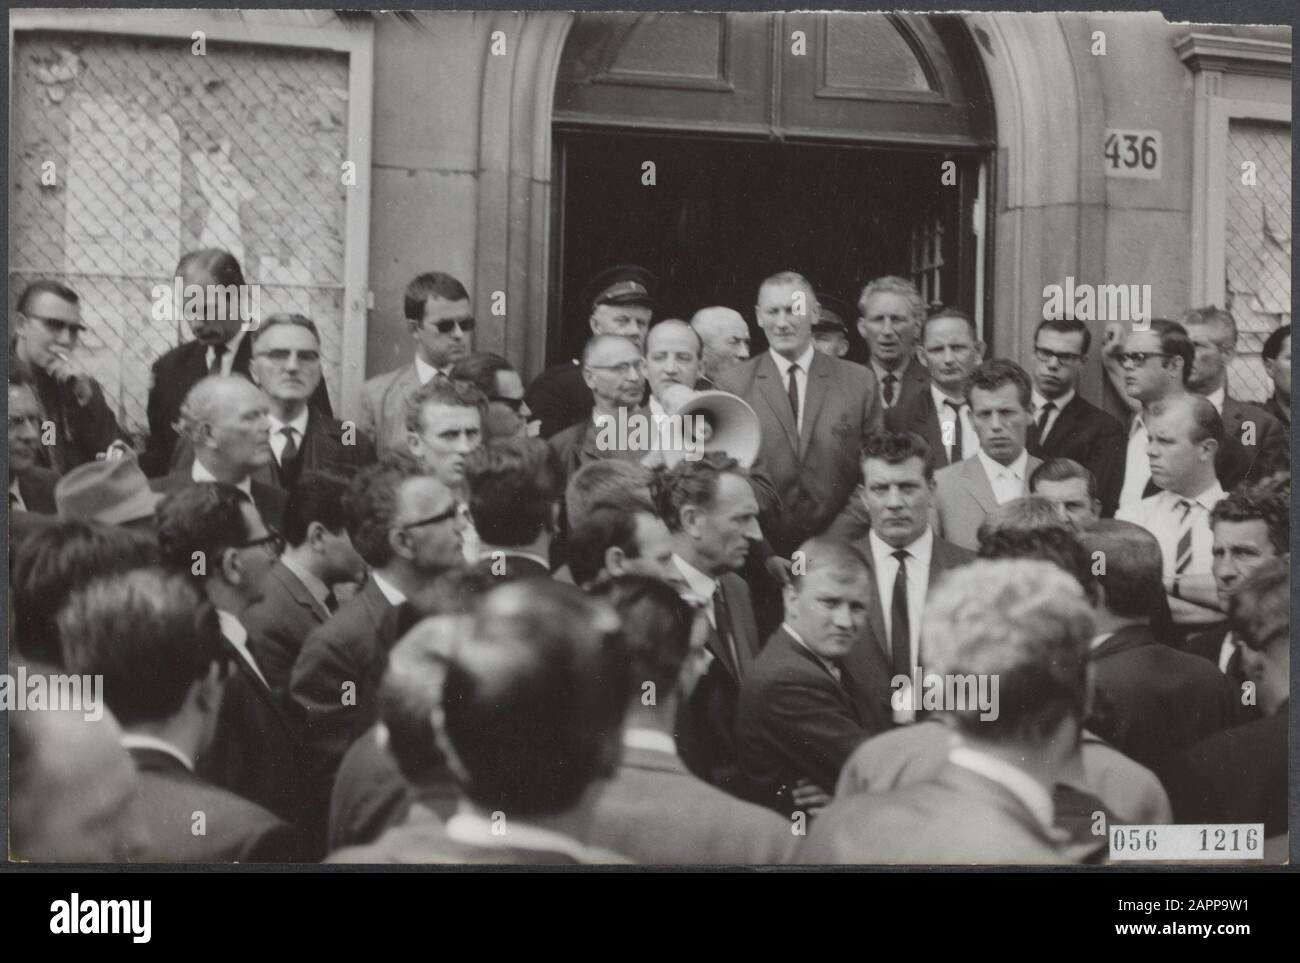 taxis, demonstrations, Protests, wage increase Date: June 15, 1965 Location: Amsterdam, Noord-Holland Keywords: Protests, demonstrations, wage increases, taxis Stock Photo